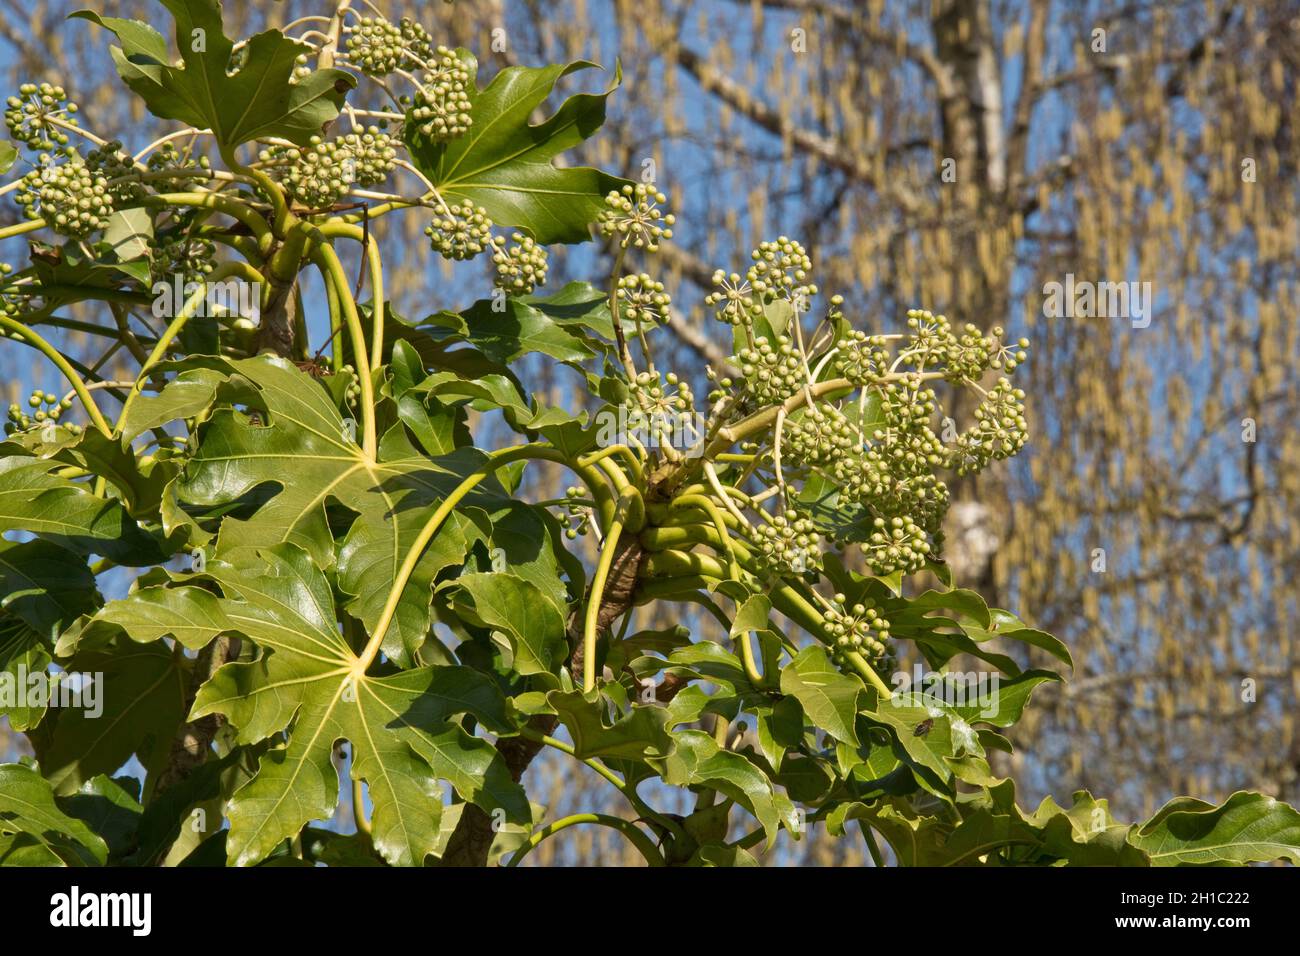 False castor oil plant (Fatsia japonica) glossy green palmately-lobed leaves and immature green clusters of fruit, Berkshire, April Stock Photo